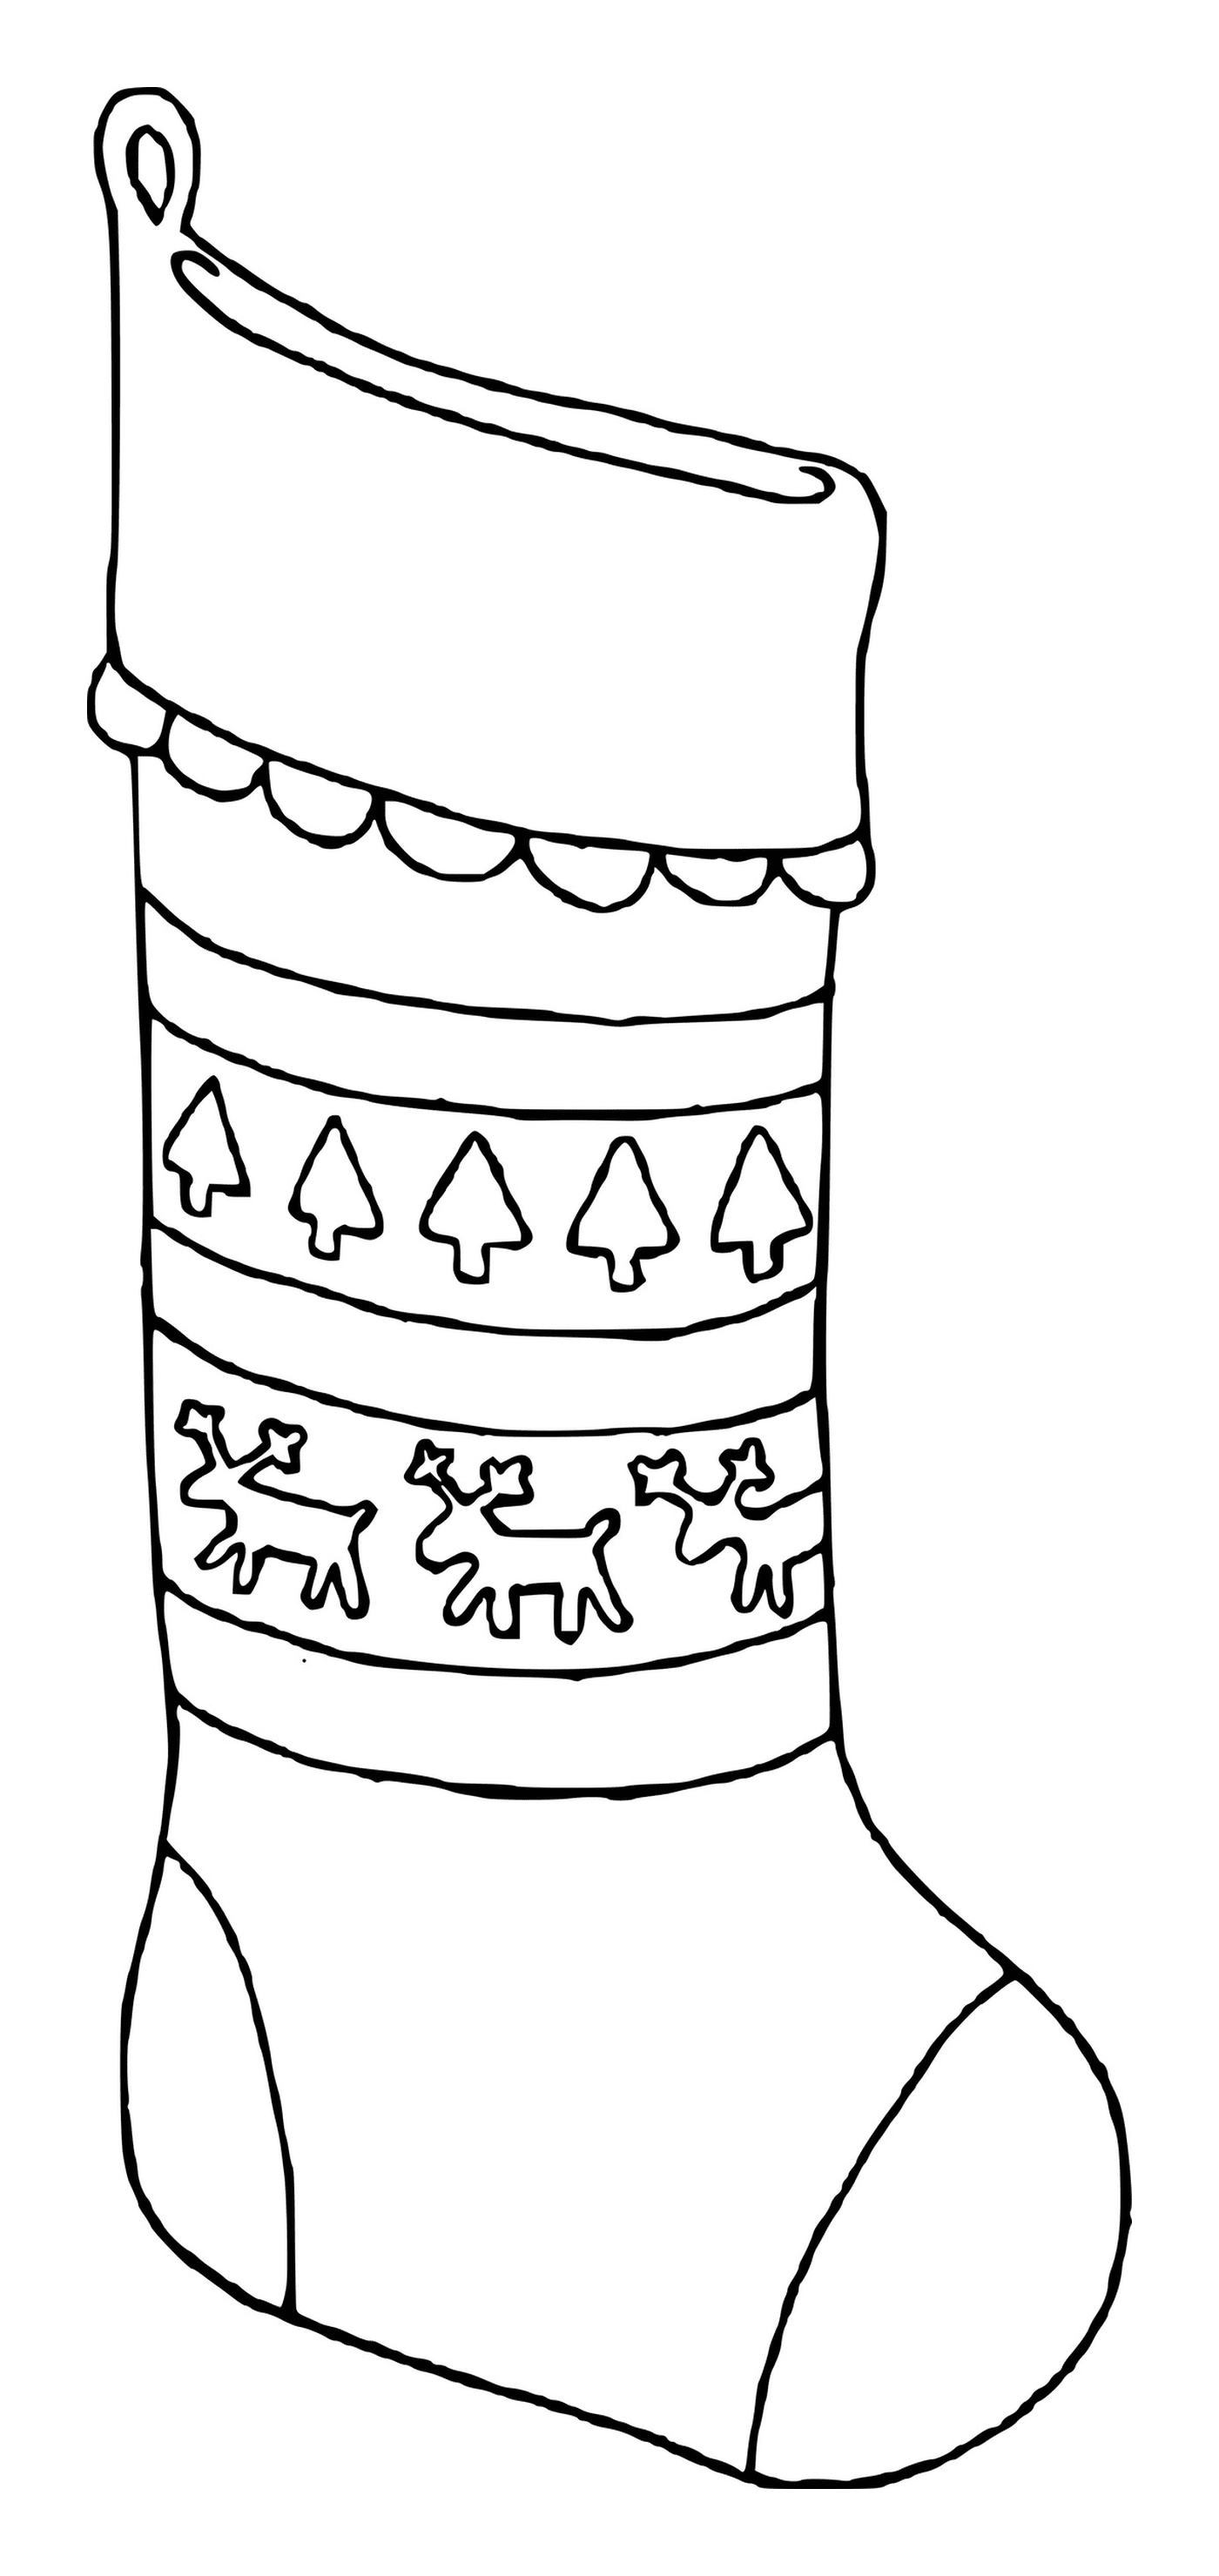  A Christmas stockings with fir trees and reindeer from Santa Claus 